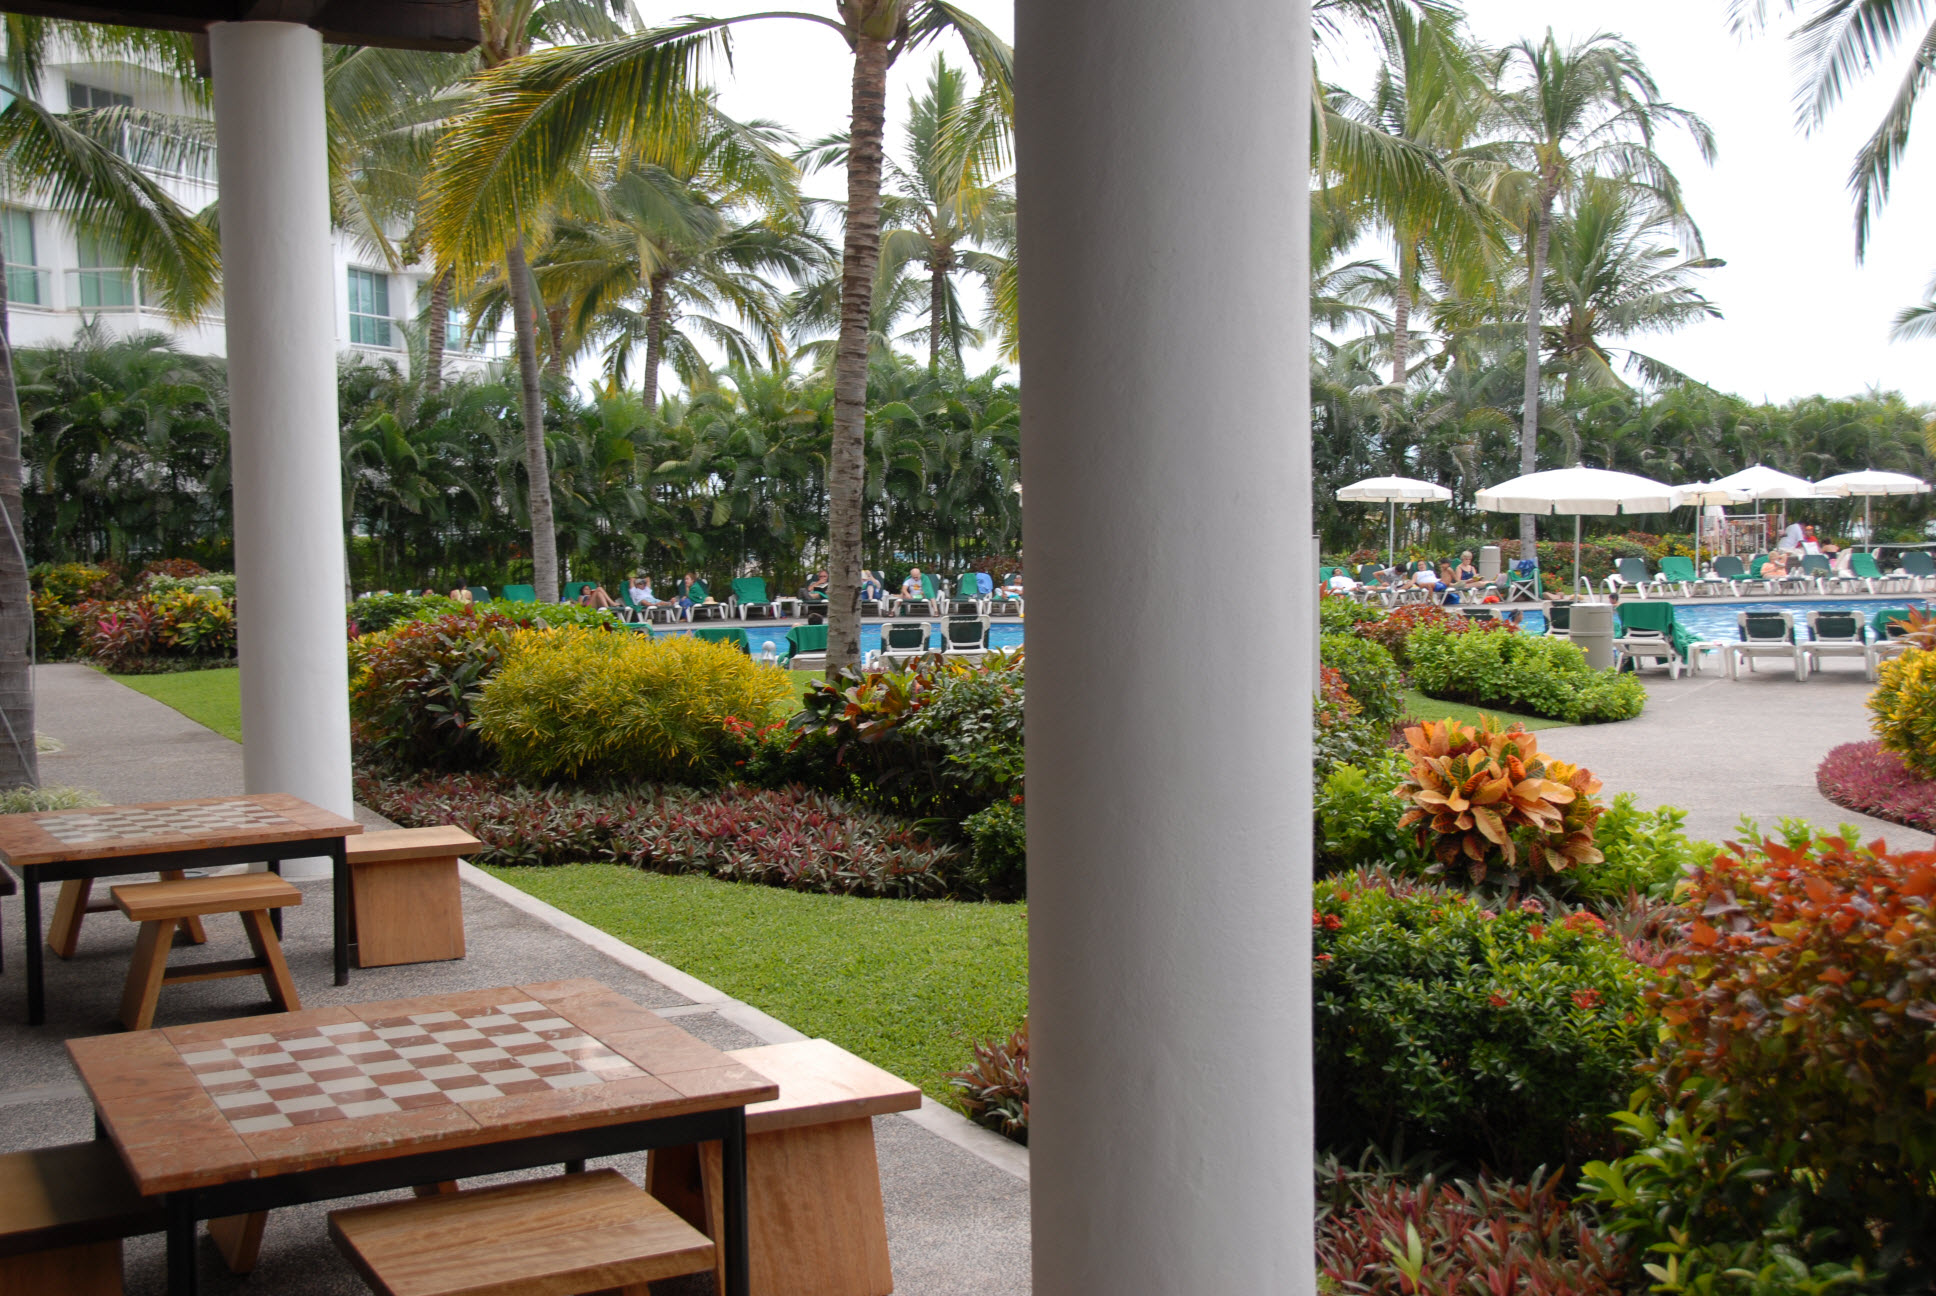 Passing through the open Sea Garden lobby leads to the ample sized swimming area.  The pool area is located only steps from the beach, which is the same beach as the beach used by the Grand Luxxe, Grand Bliss, Grand Mayan and Mayan Palace resorts in Nuevo Vallarta.